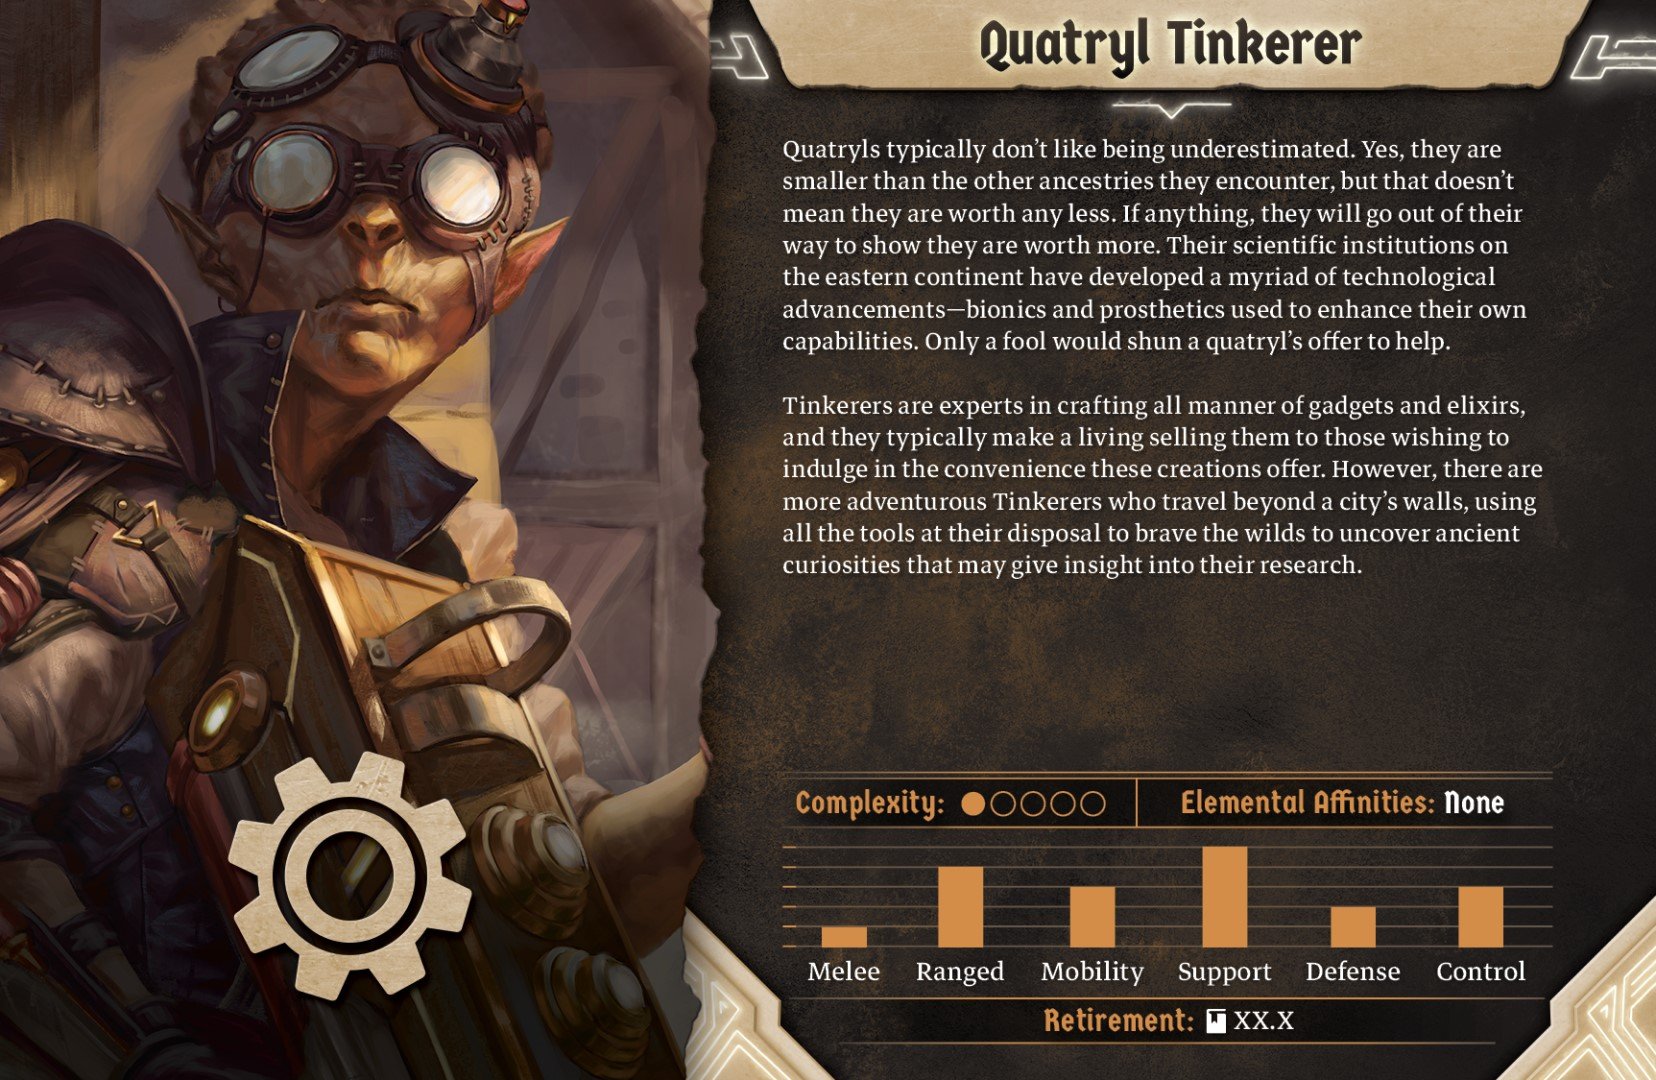 Gloomhaven Isaac Childres interview - Cephalofair image of Tinkerer mat (back) from second edition